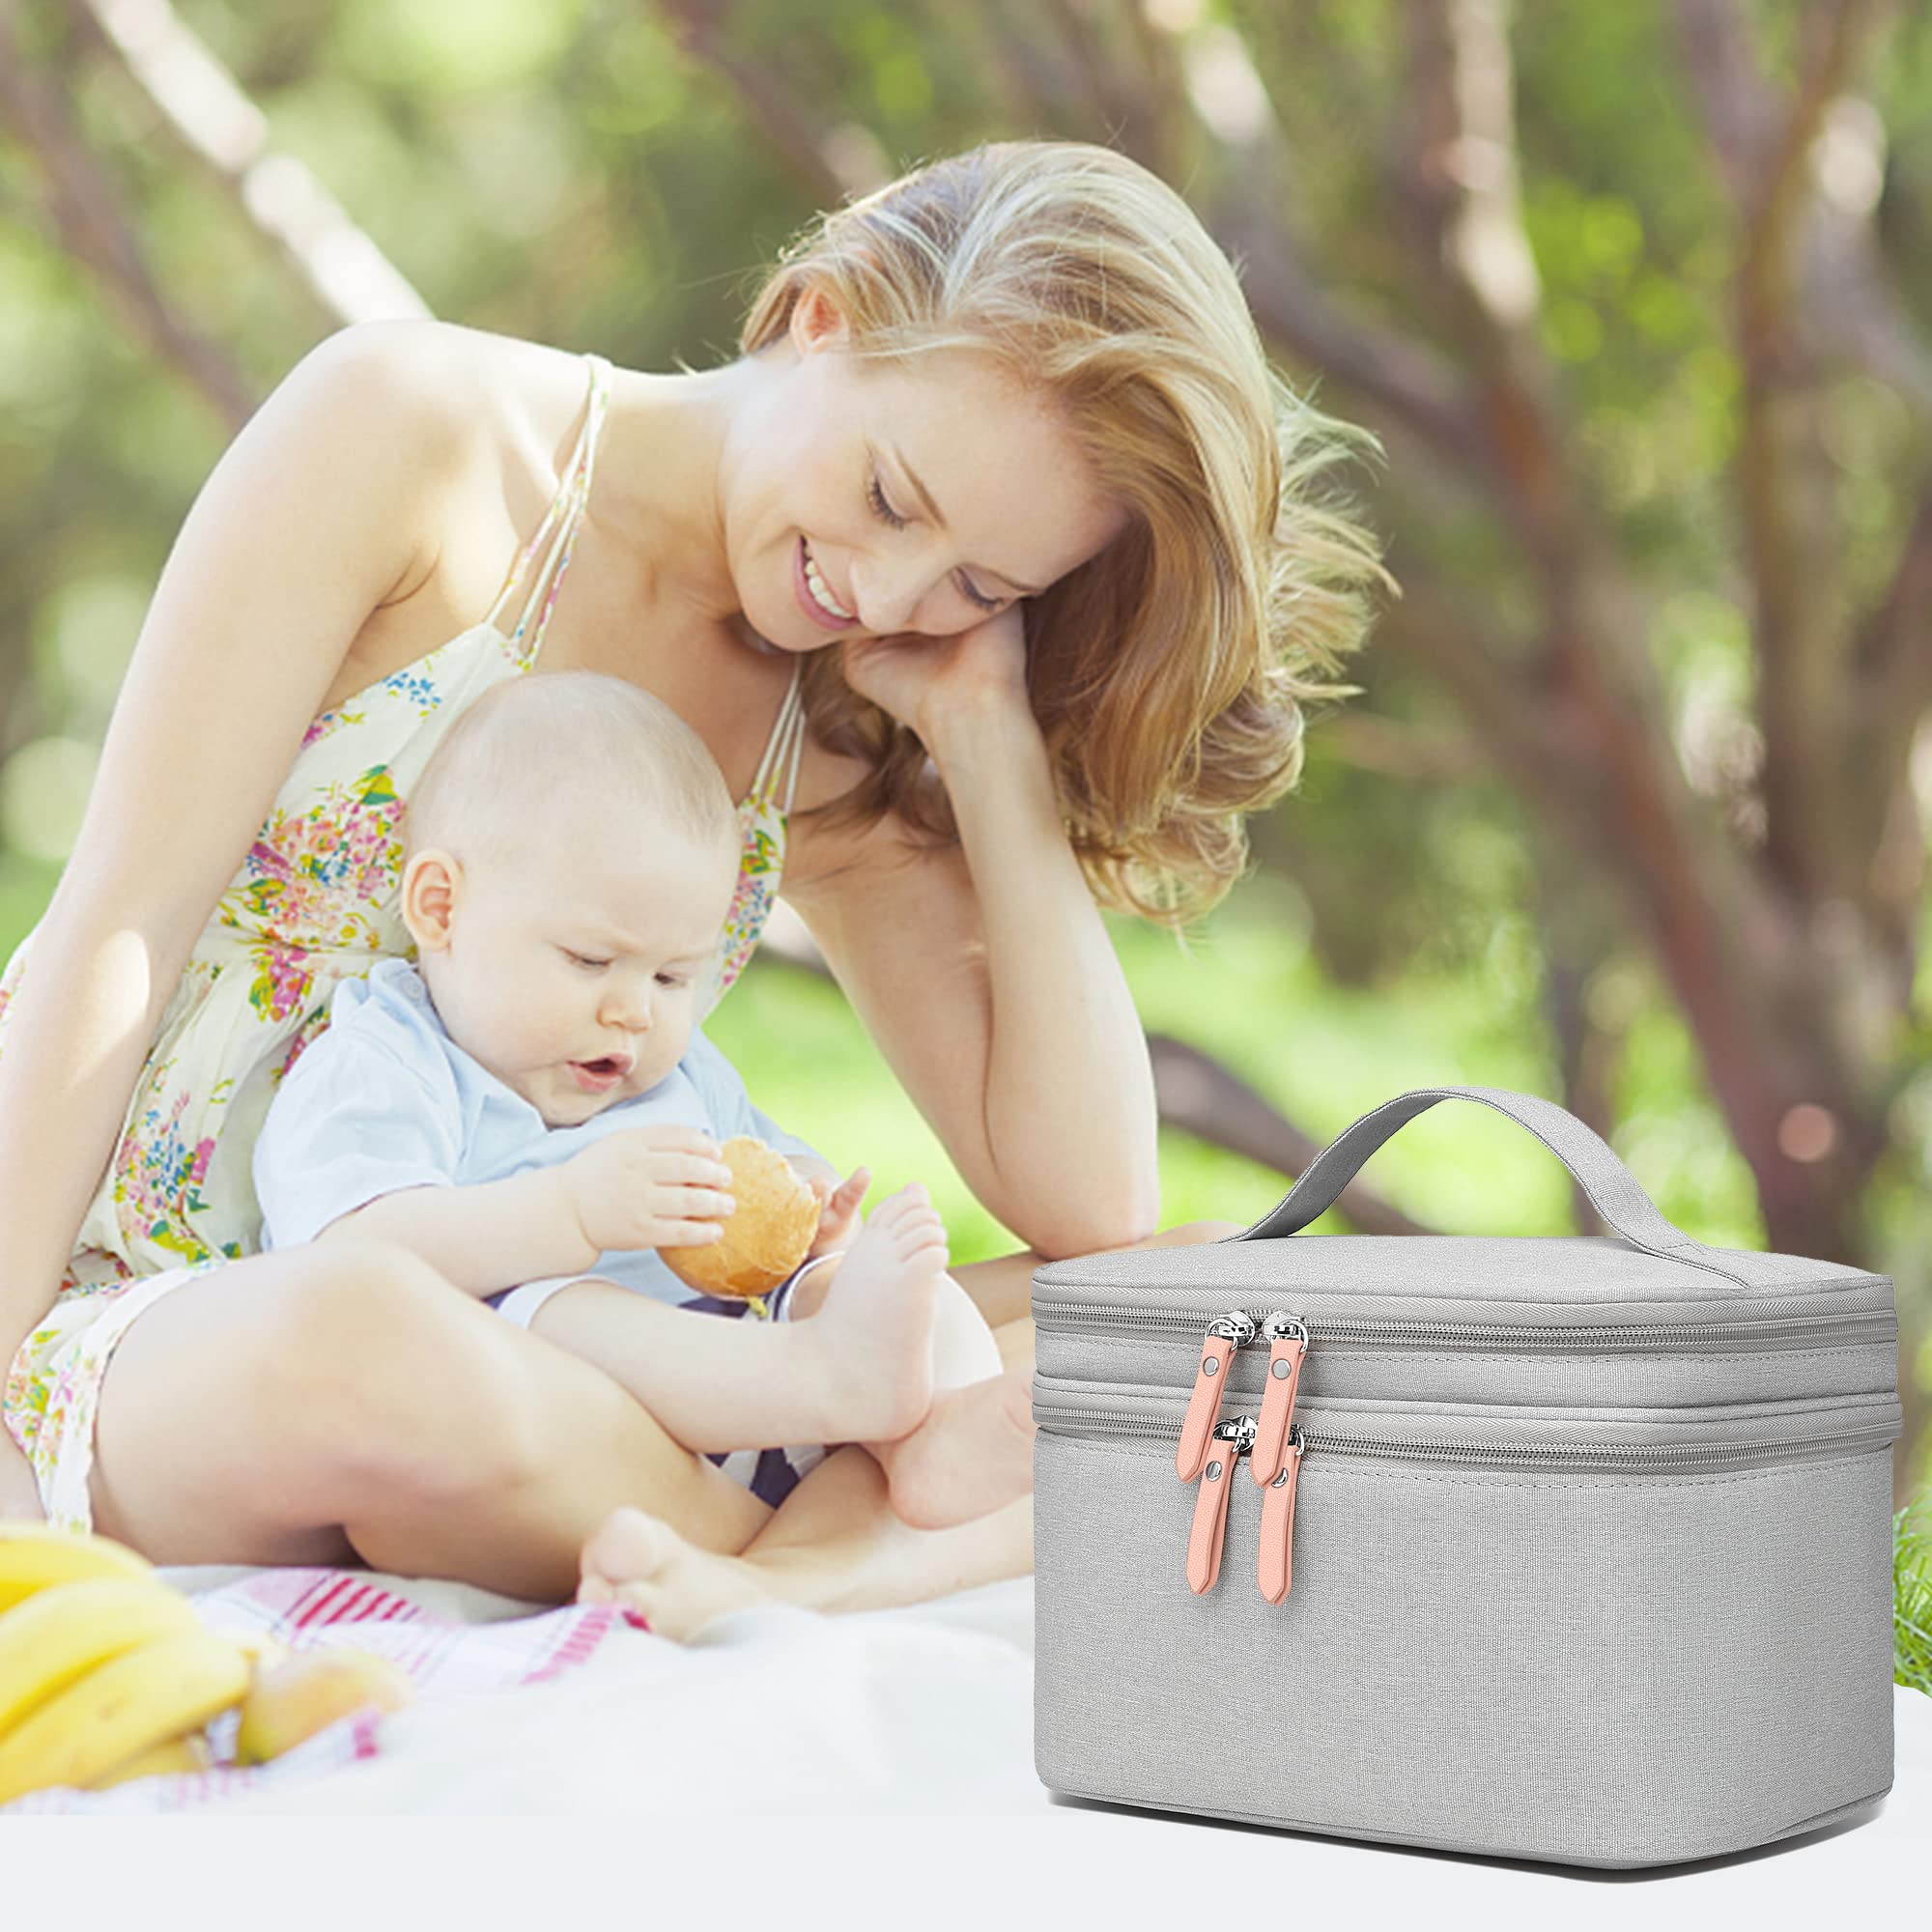 QIUXQIU Breast Pump Bag for Hands-Free Wearable Breast Pumps、Bottles,Pump Parts, and Storage Bag，Tote Bag，Multi-Function Breastmilk Cooler Bag Insulated Bag(Gray)